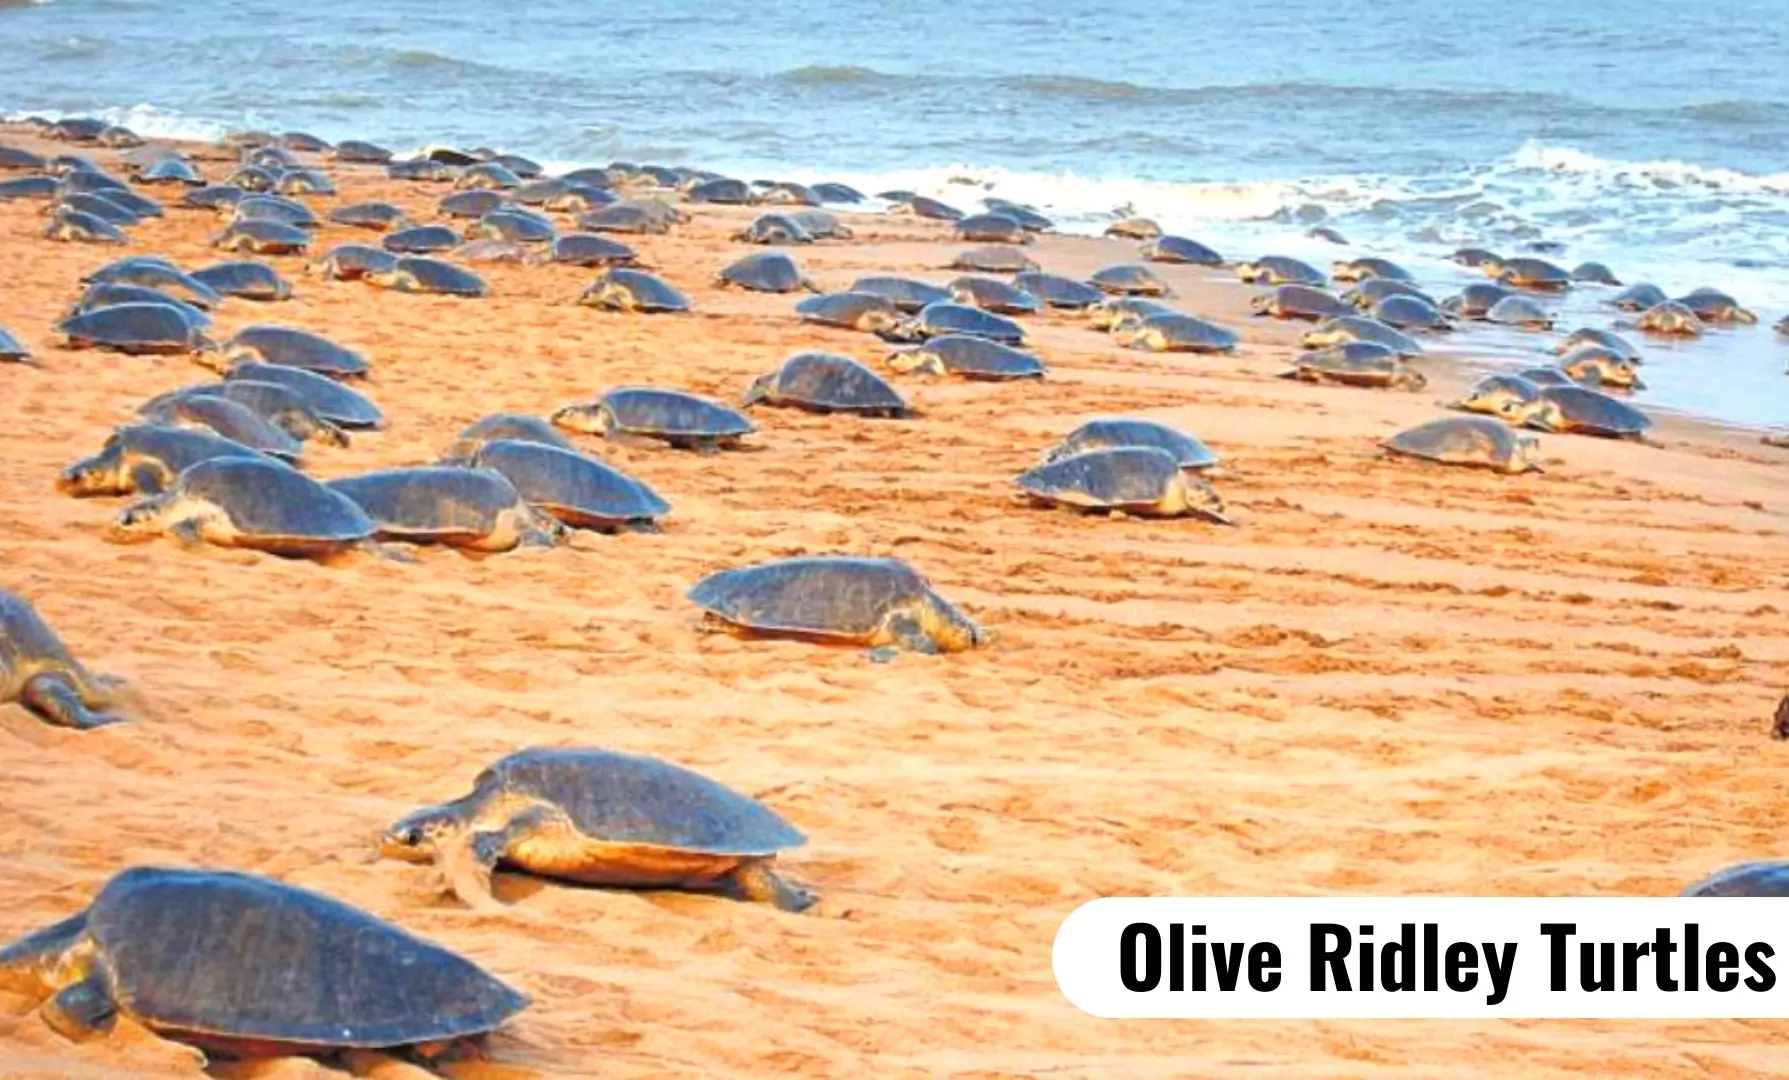 Olive Ridley Turtle
